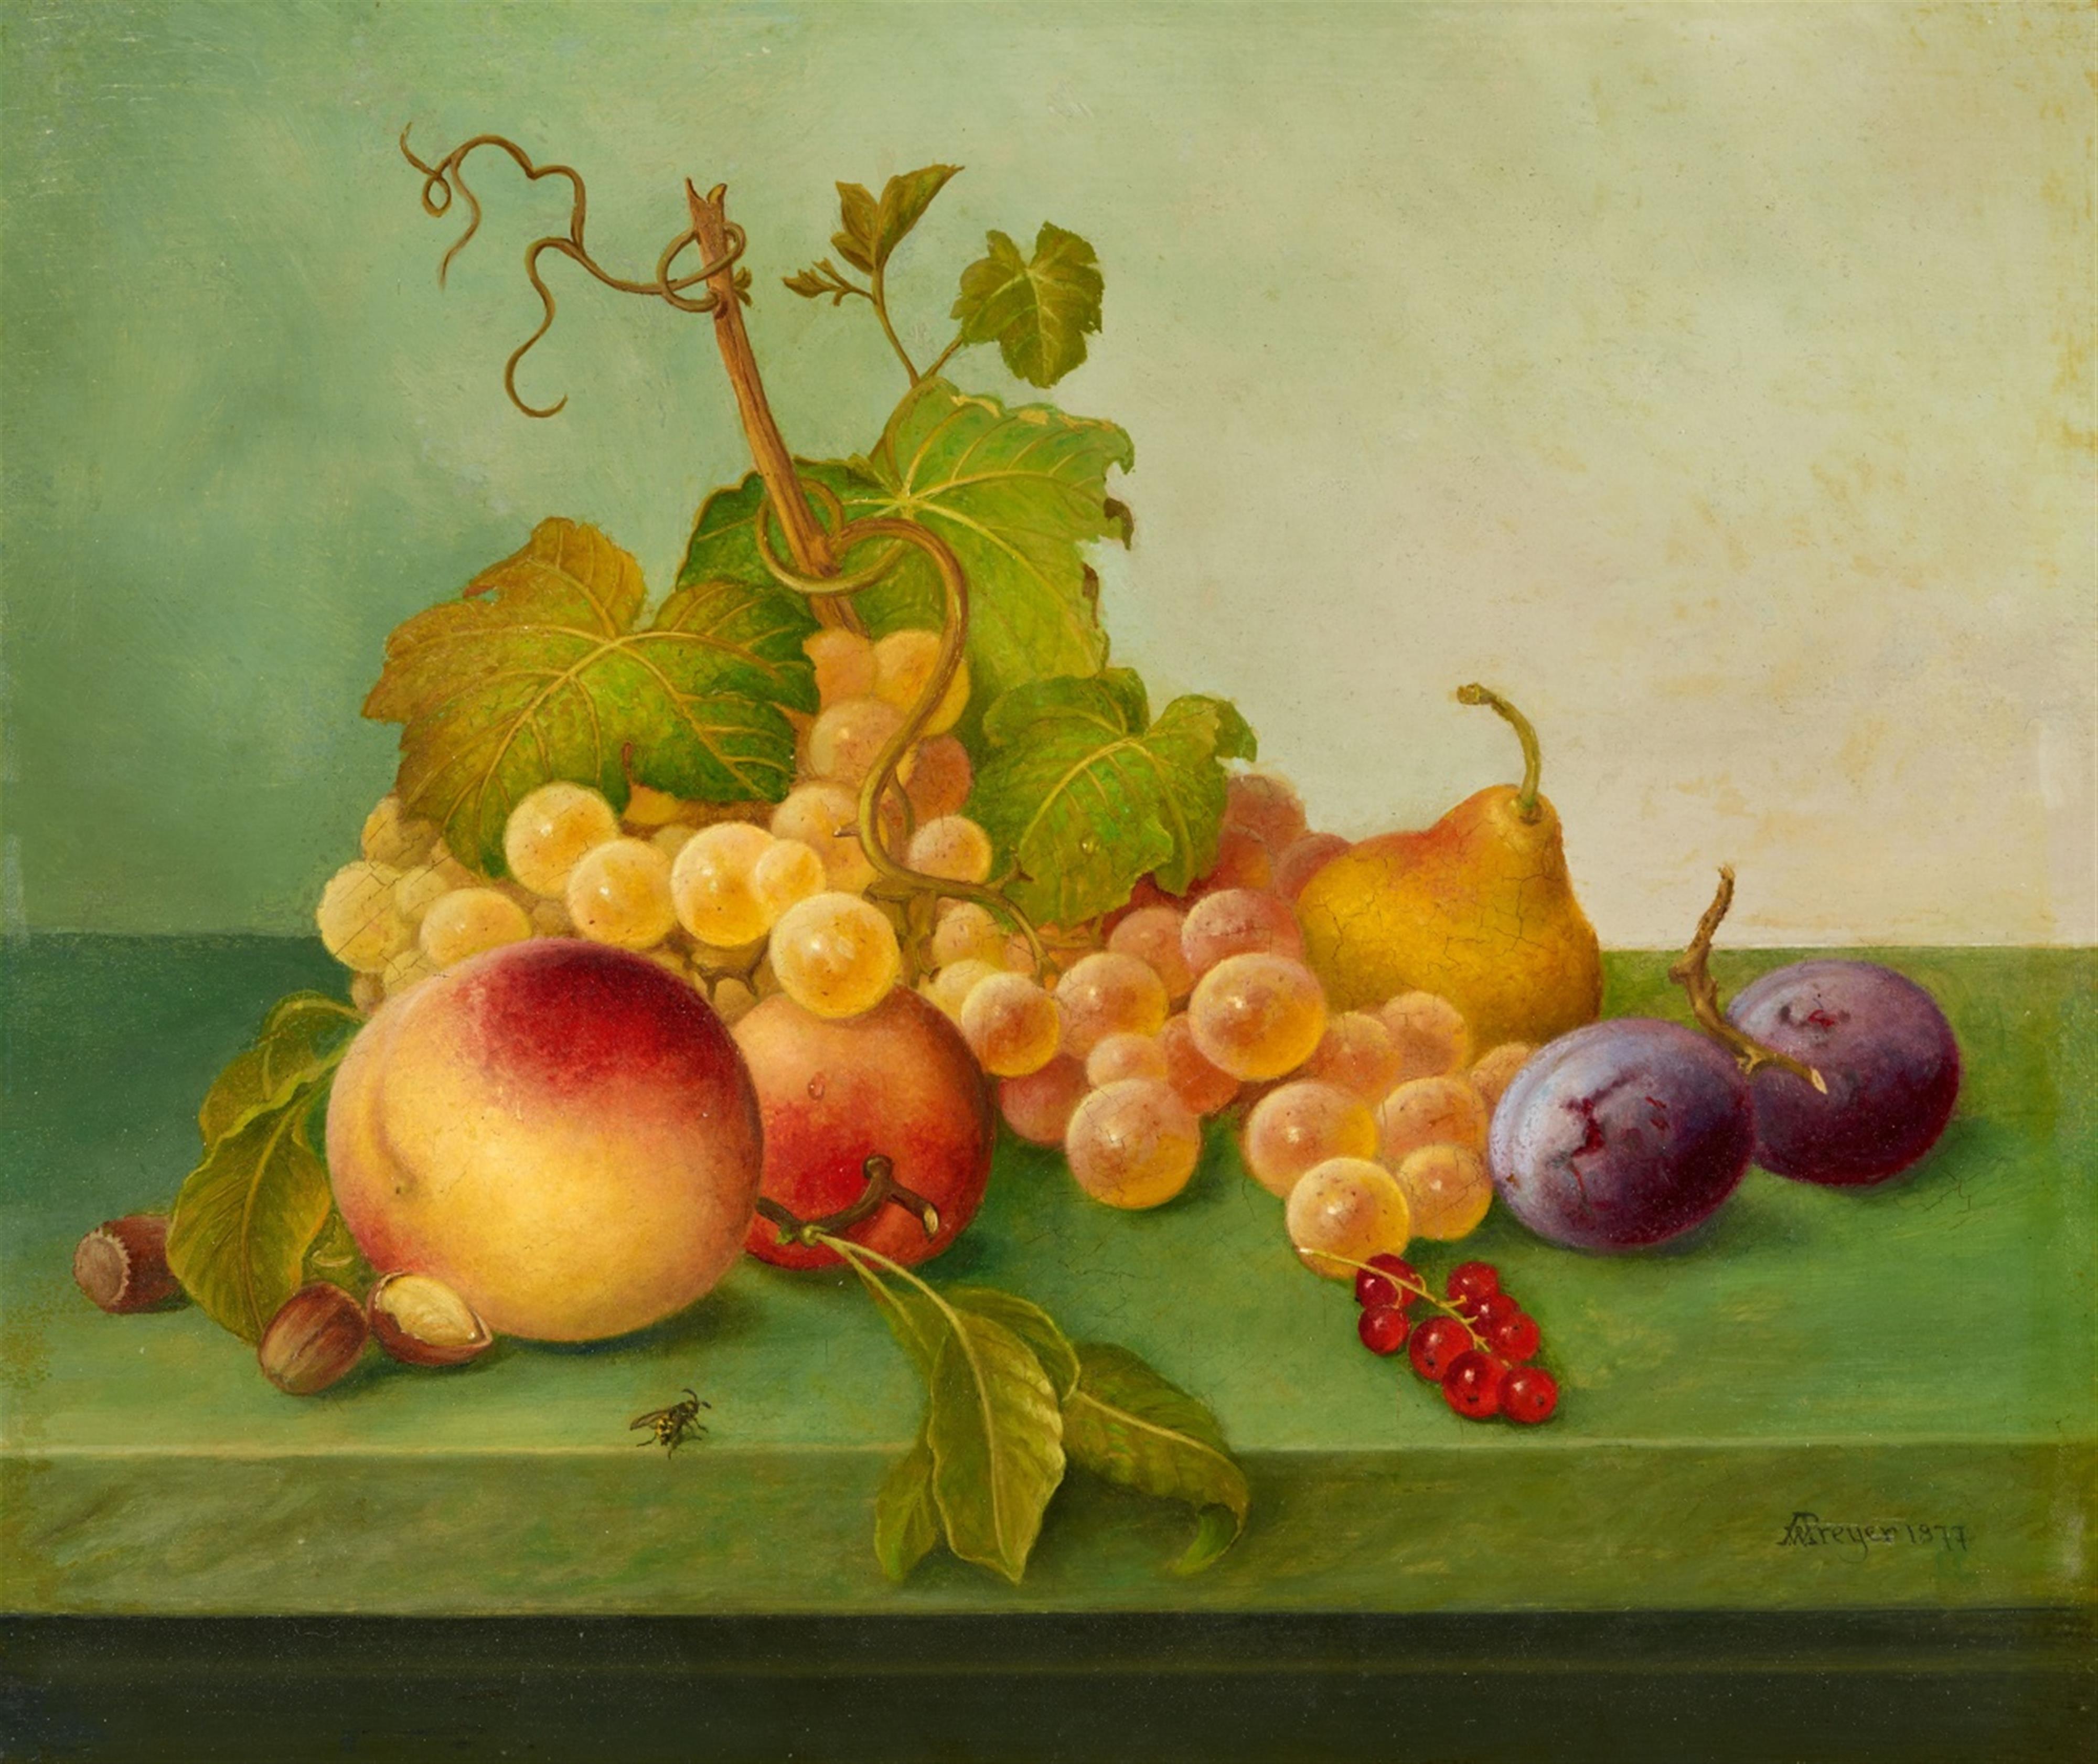 Johann Wilhelm Preyer - Still Life with Fruit and Berries on a Stone Ledge - image-1